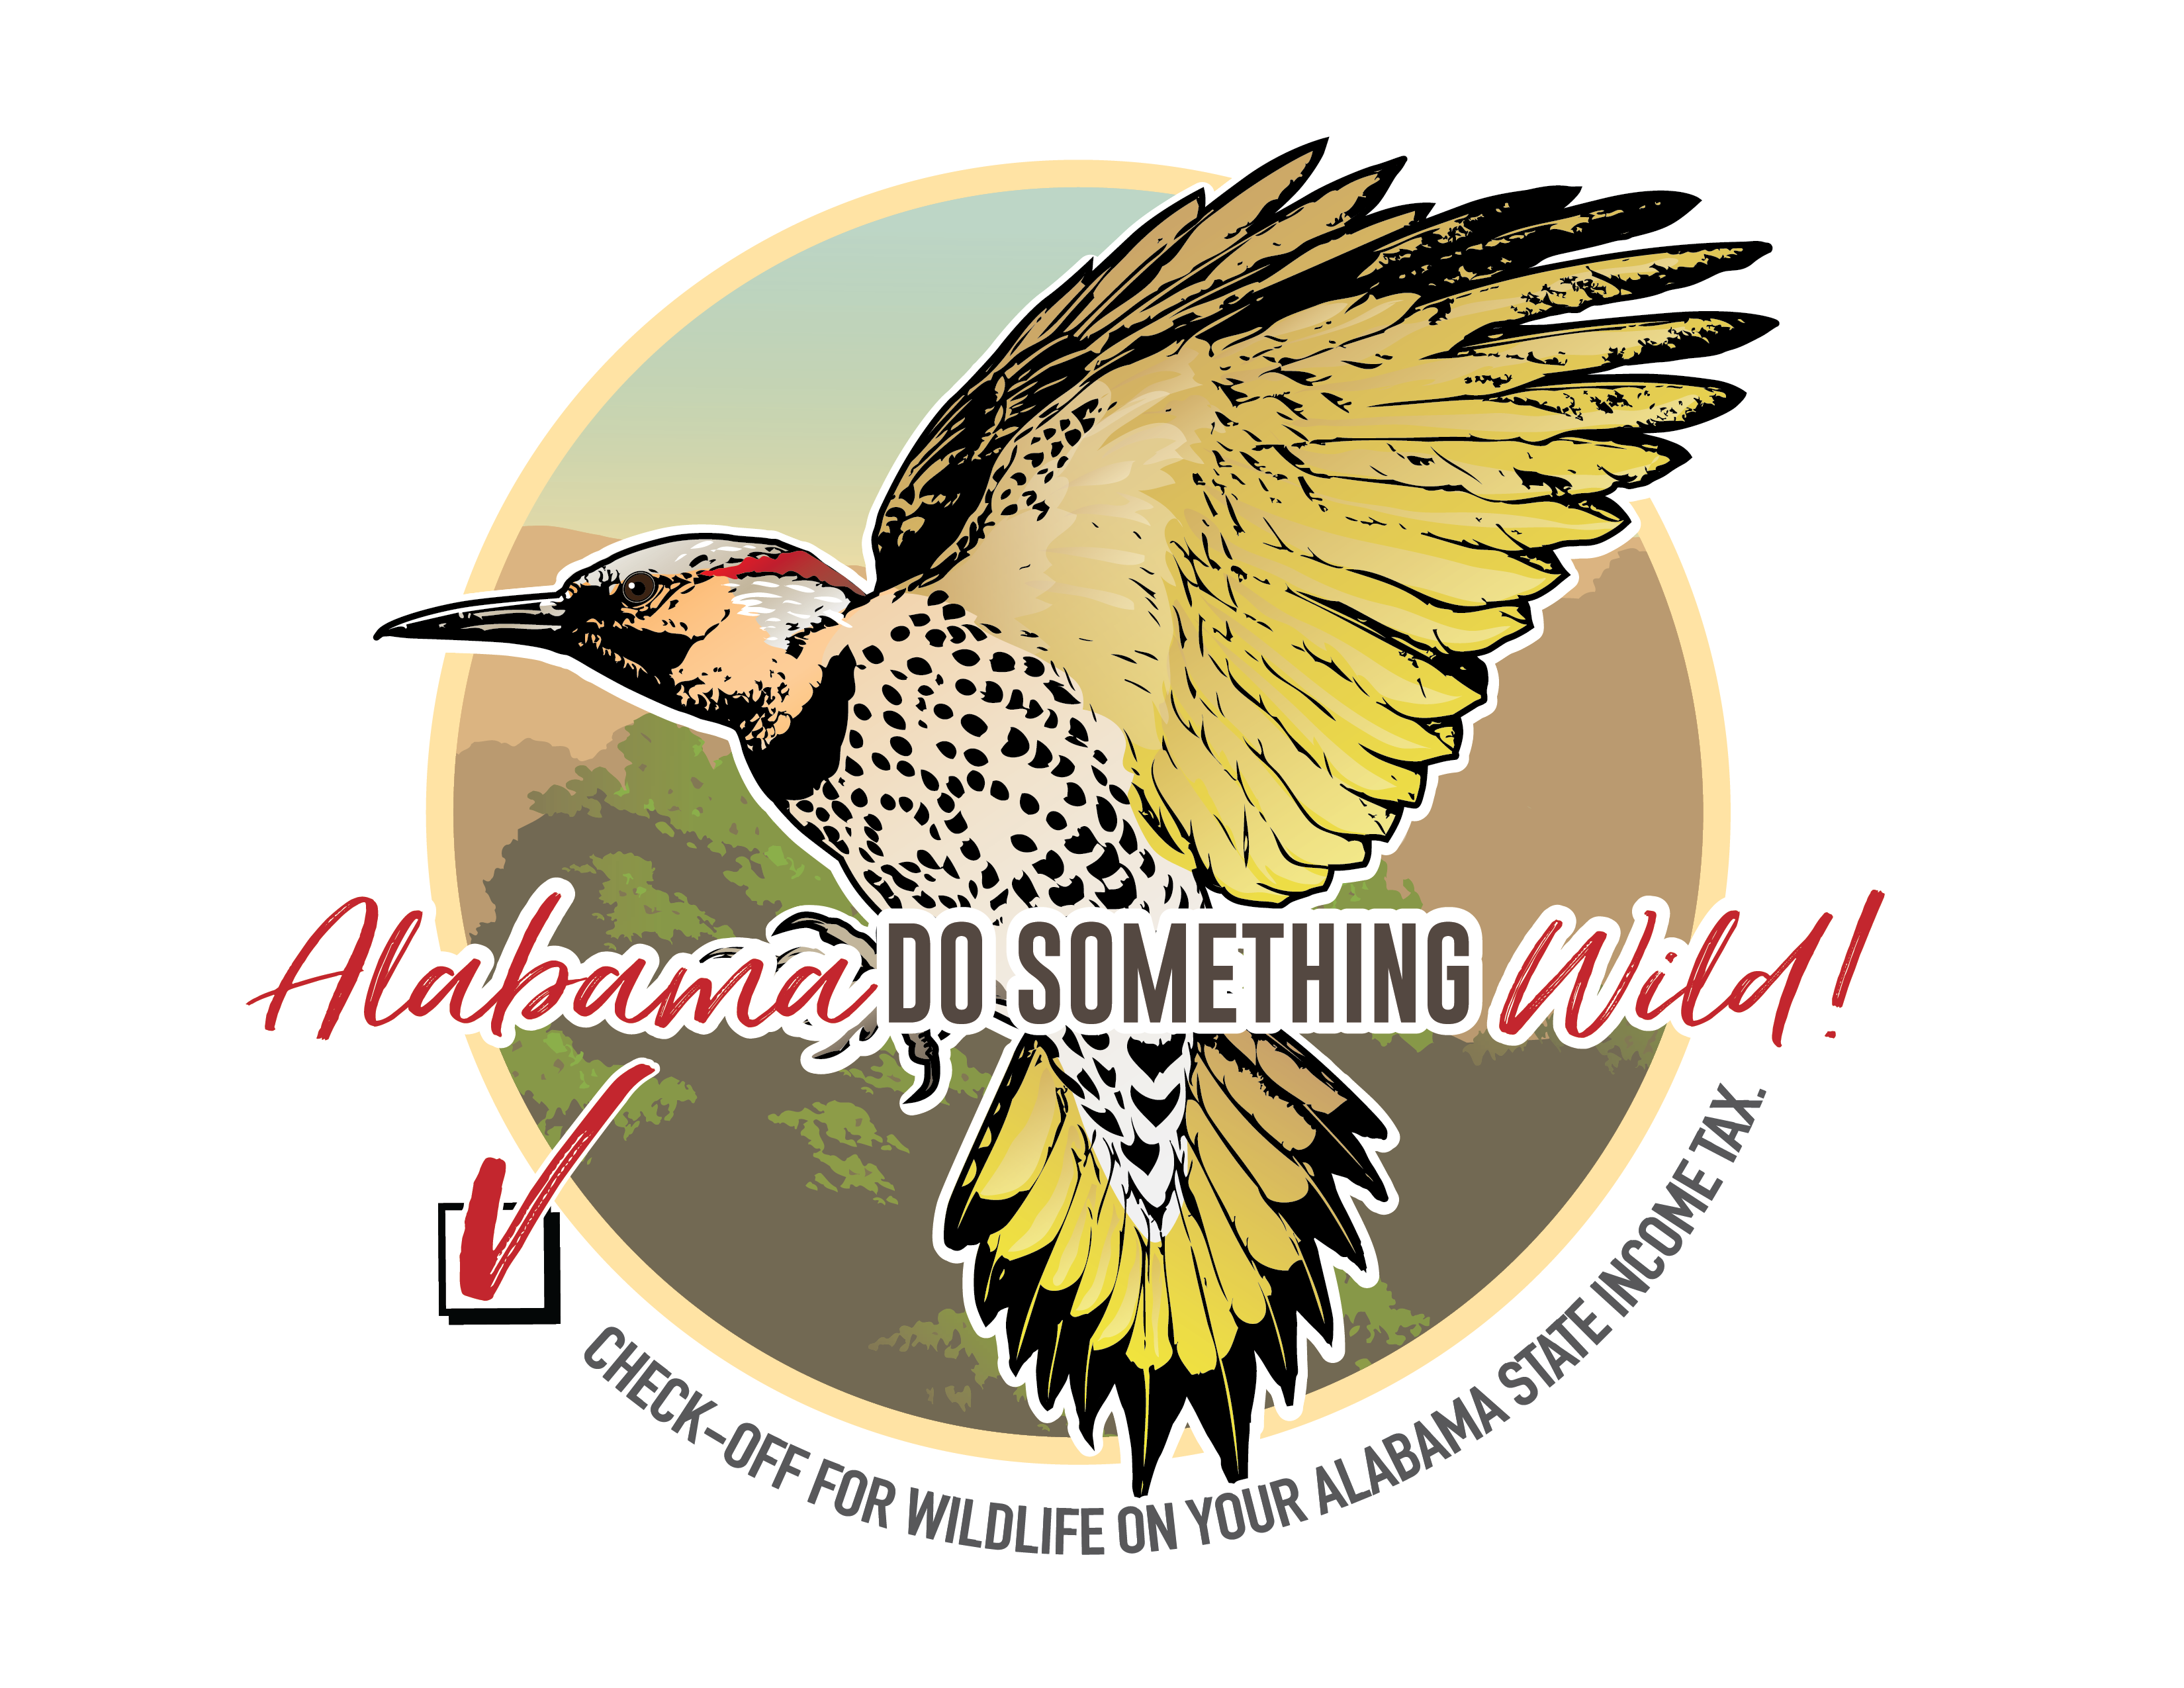 Your Donations Help Support Alabama’s Wildlife